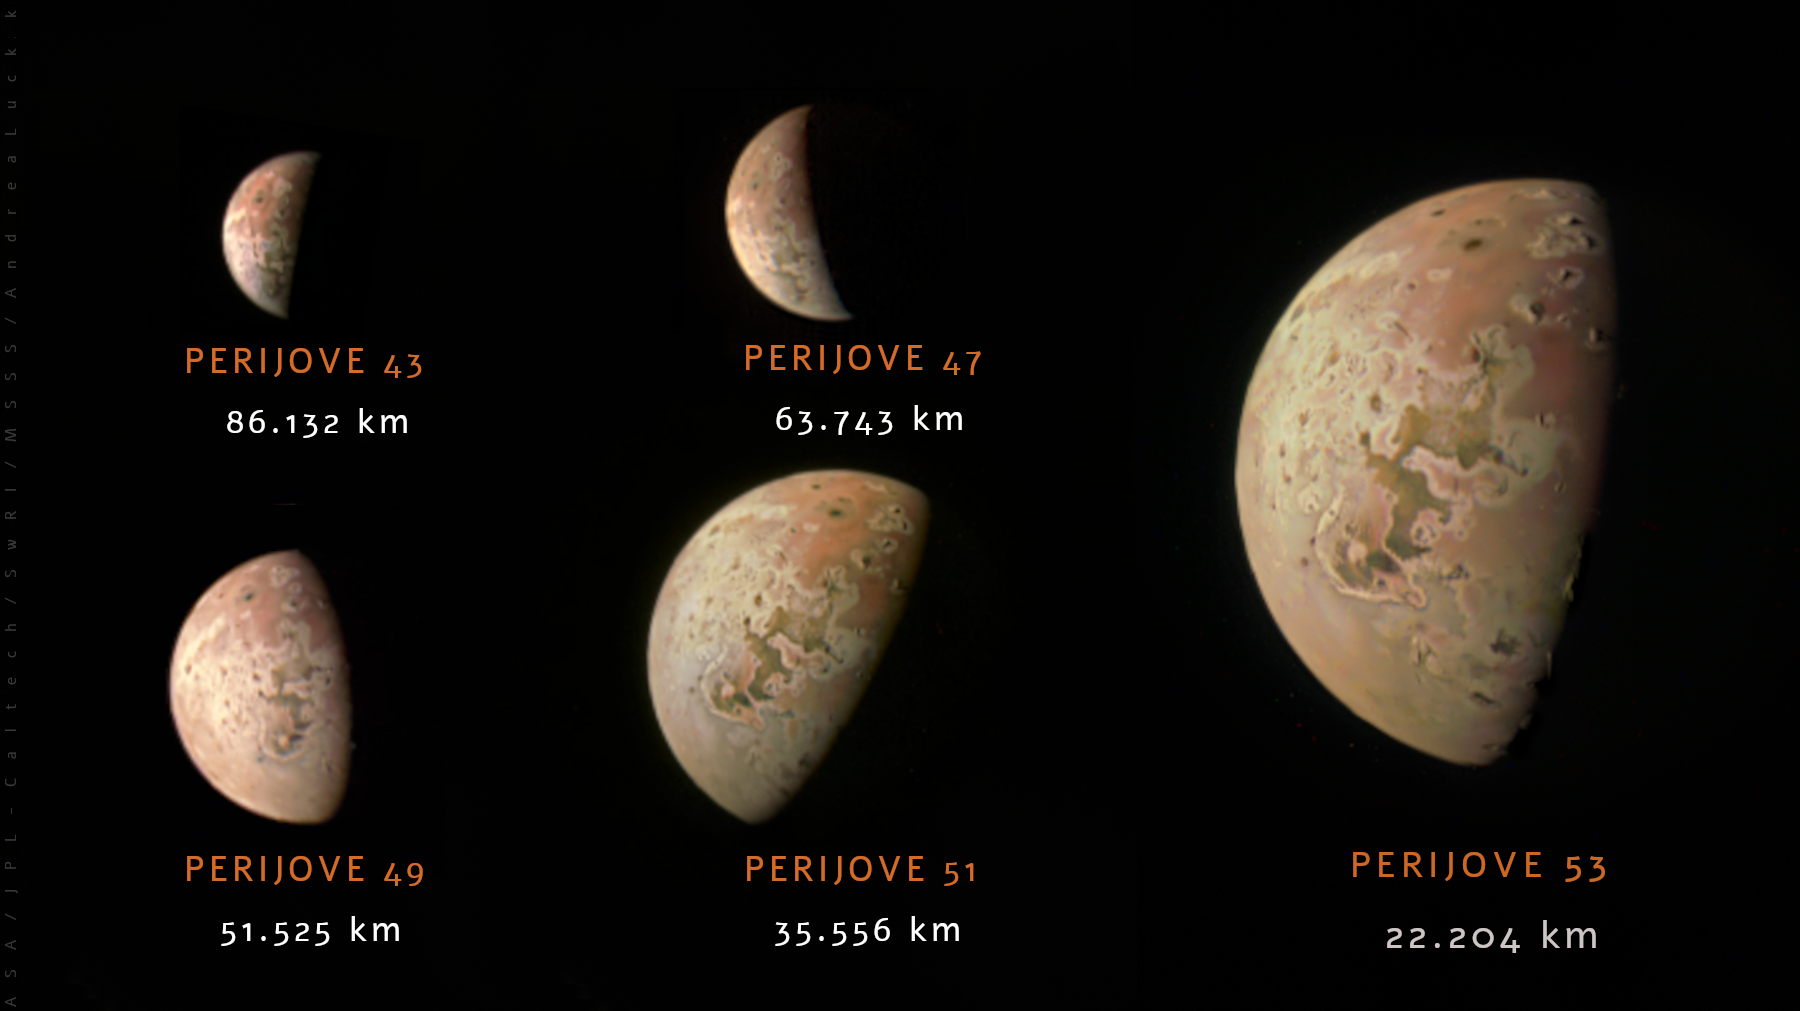 Jupiter's moons, including Io, are shown in different sizes.